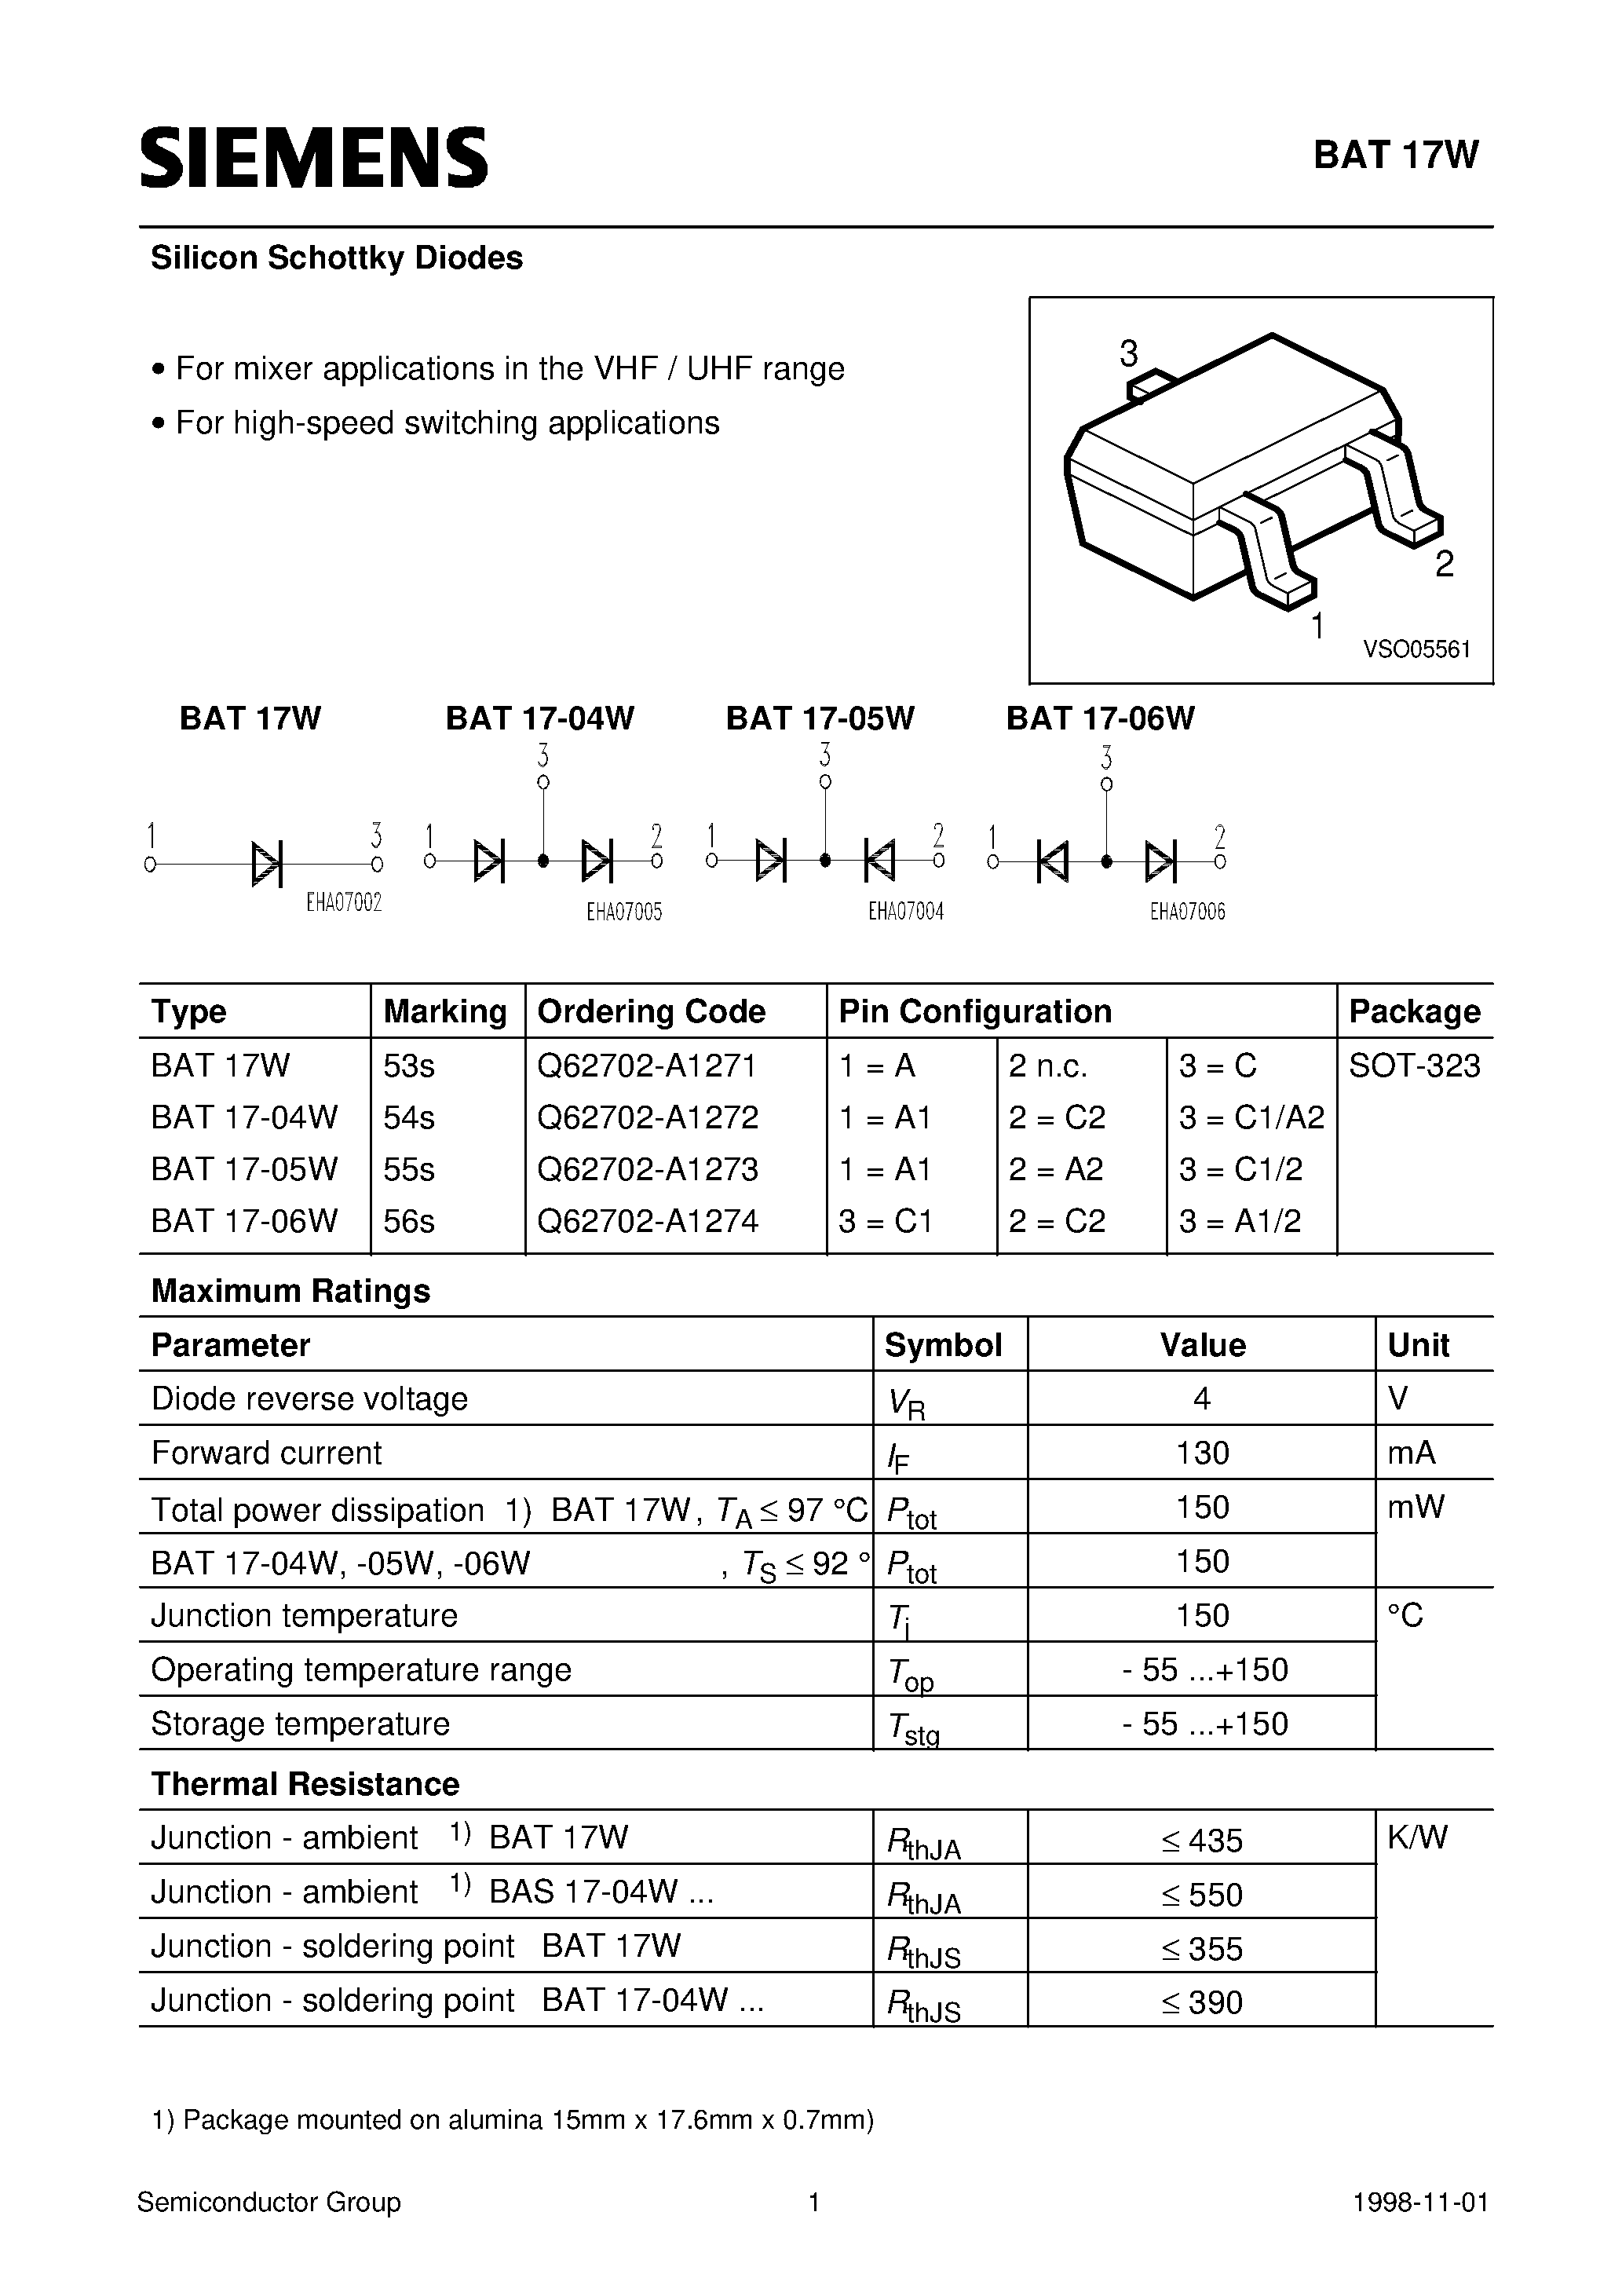 Datasheet BAT17W - Silicon Schottky Diodes (For mixer applications in the VHF / UHF range For high-speed switching applications) page 1